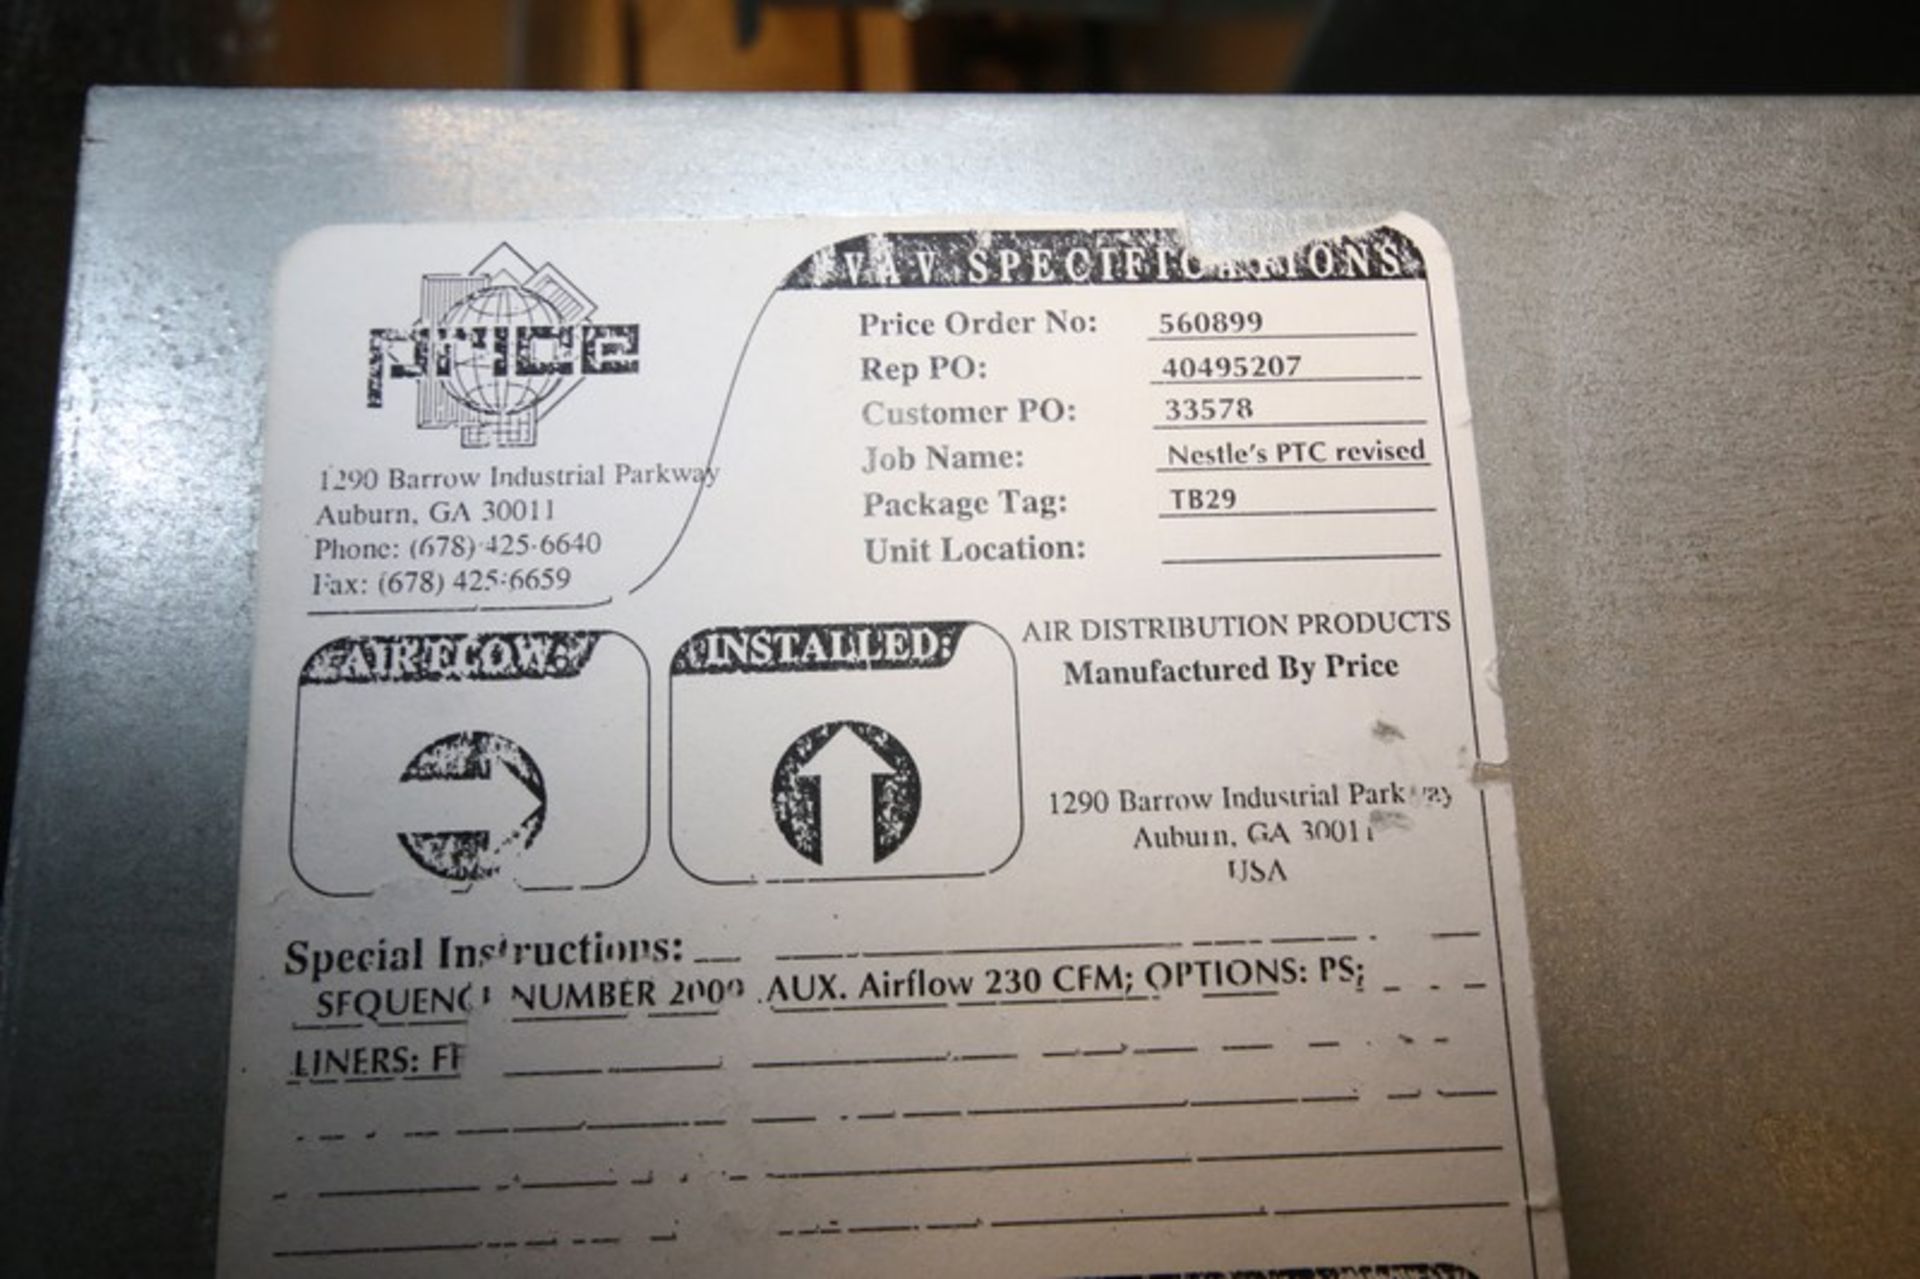 Lot of (4) Assorted Air Distribution / Price 16", 12", 8" & 10" Evaporator Coils, Order #560899, - Image 6 of 7